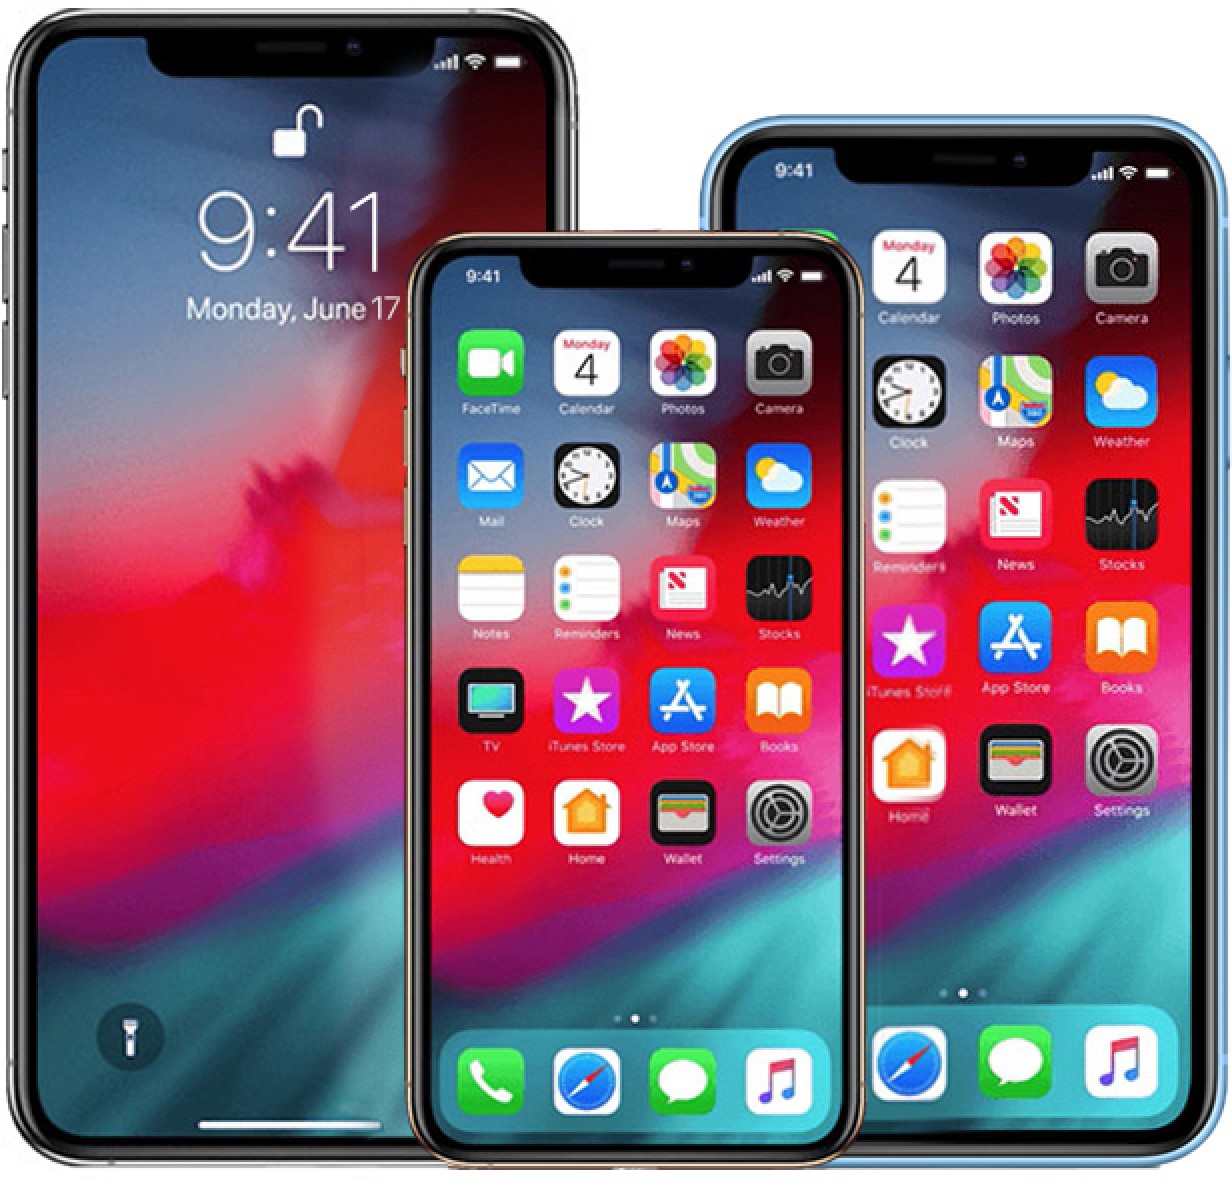 Kuo: All Three iPhones Coming in 2020 Will Support 5G